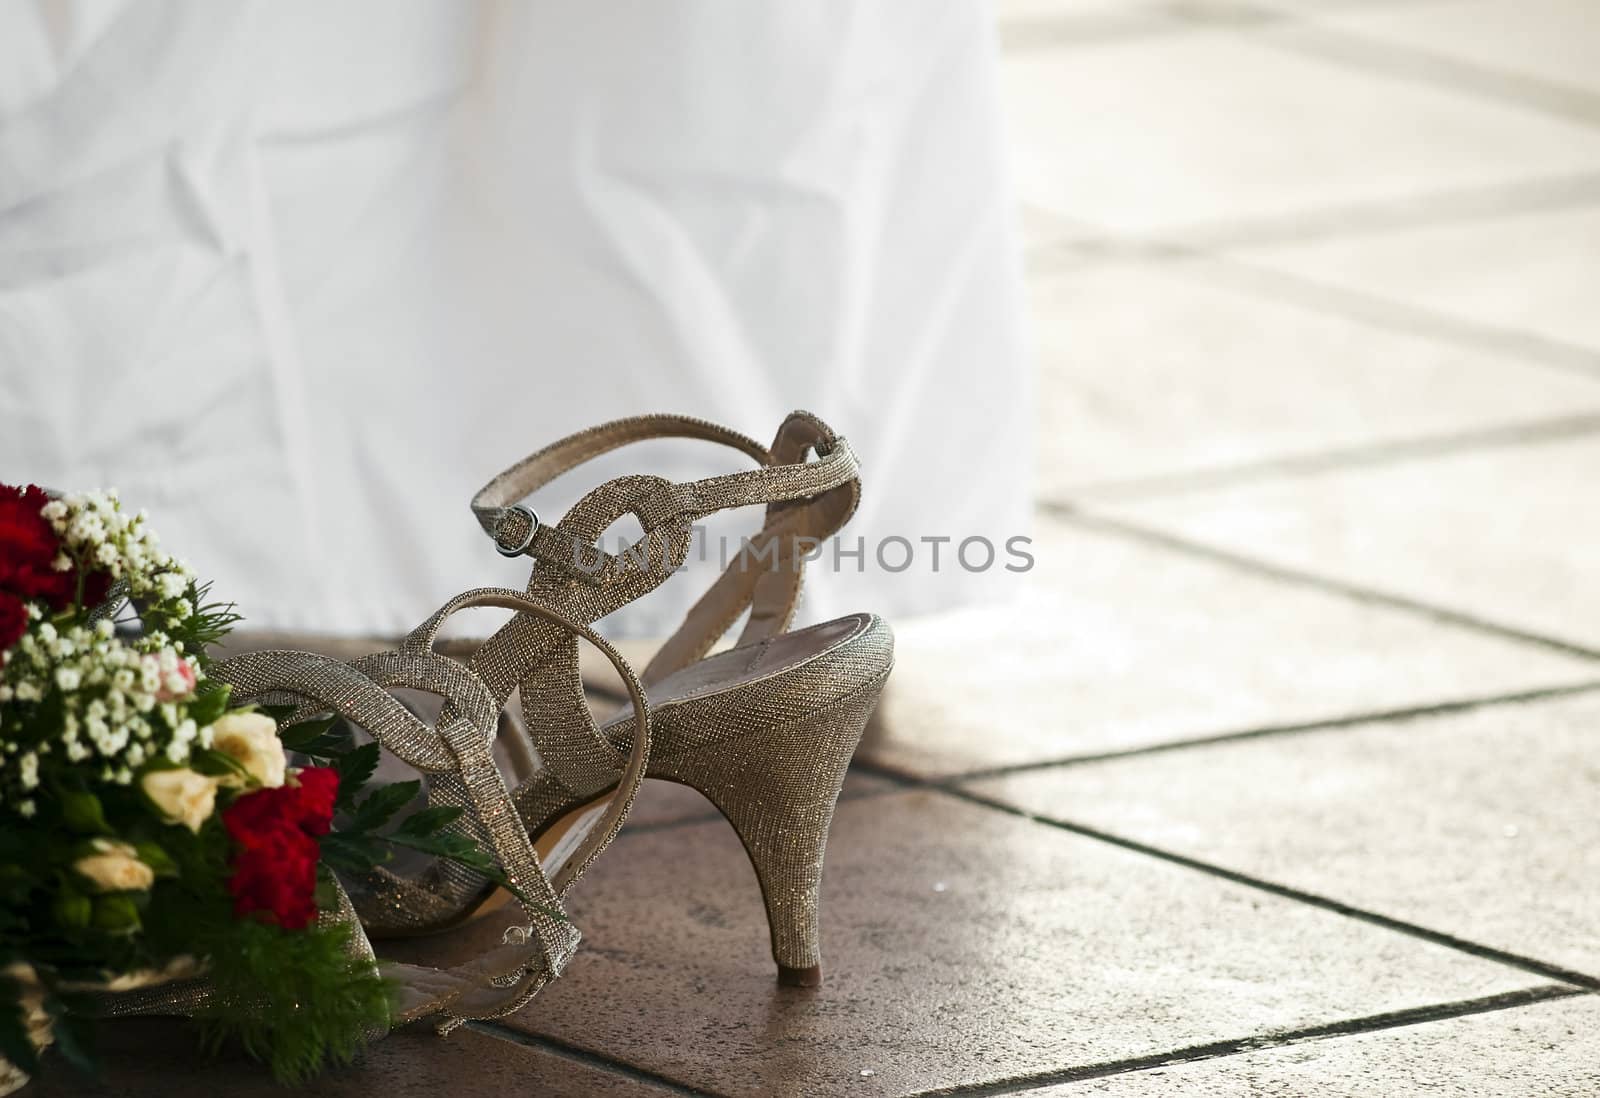 The Bridesmaid's Shoe by PhotoWorks